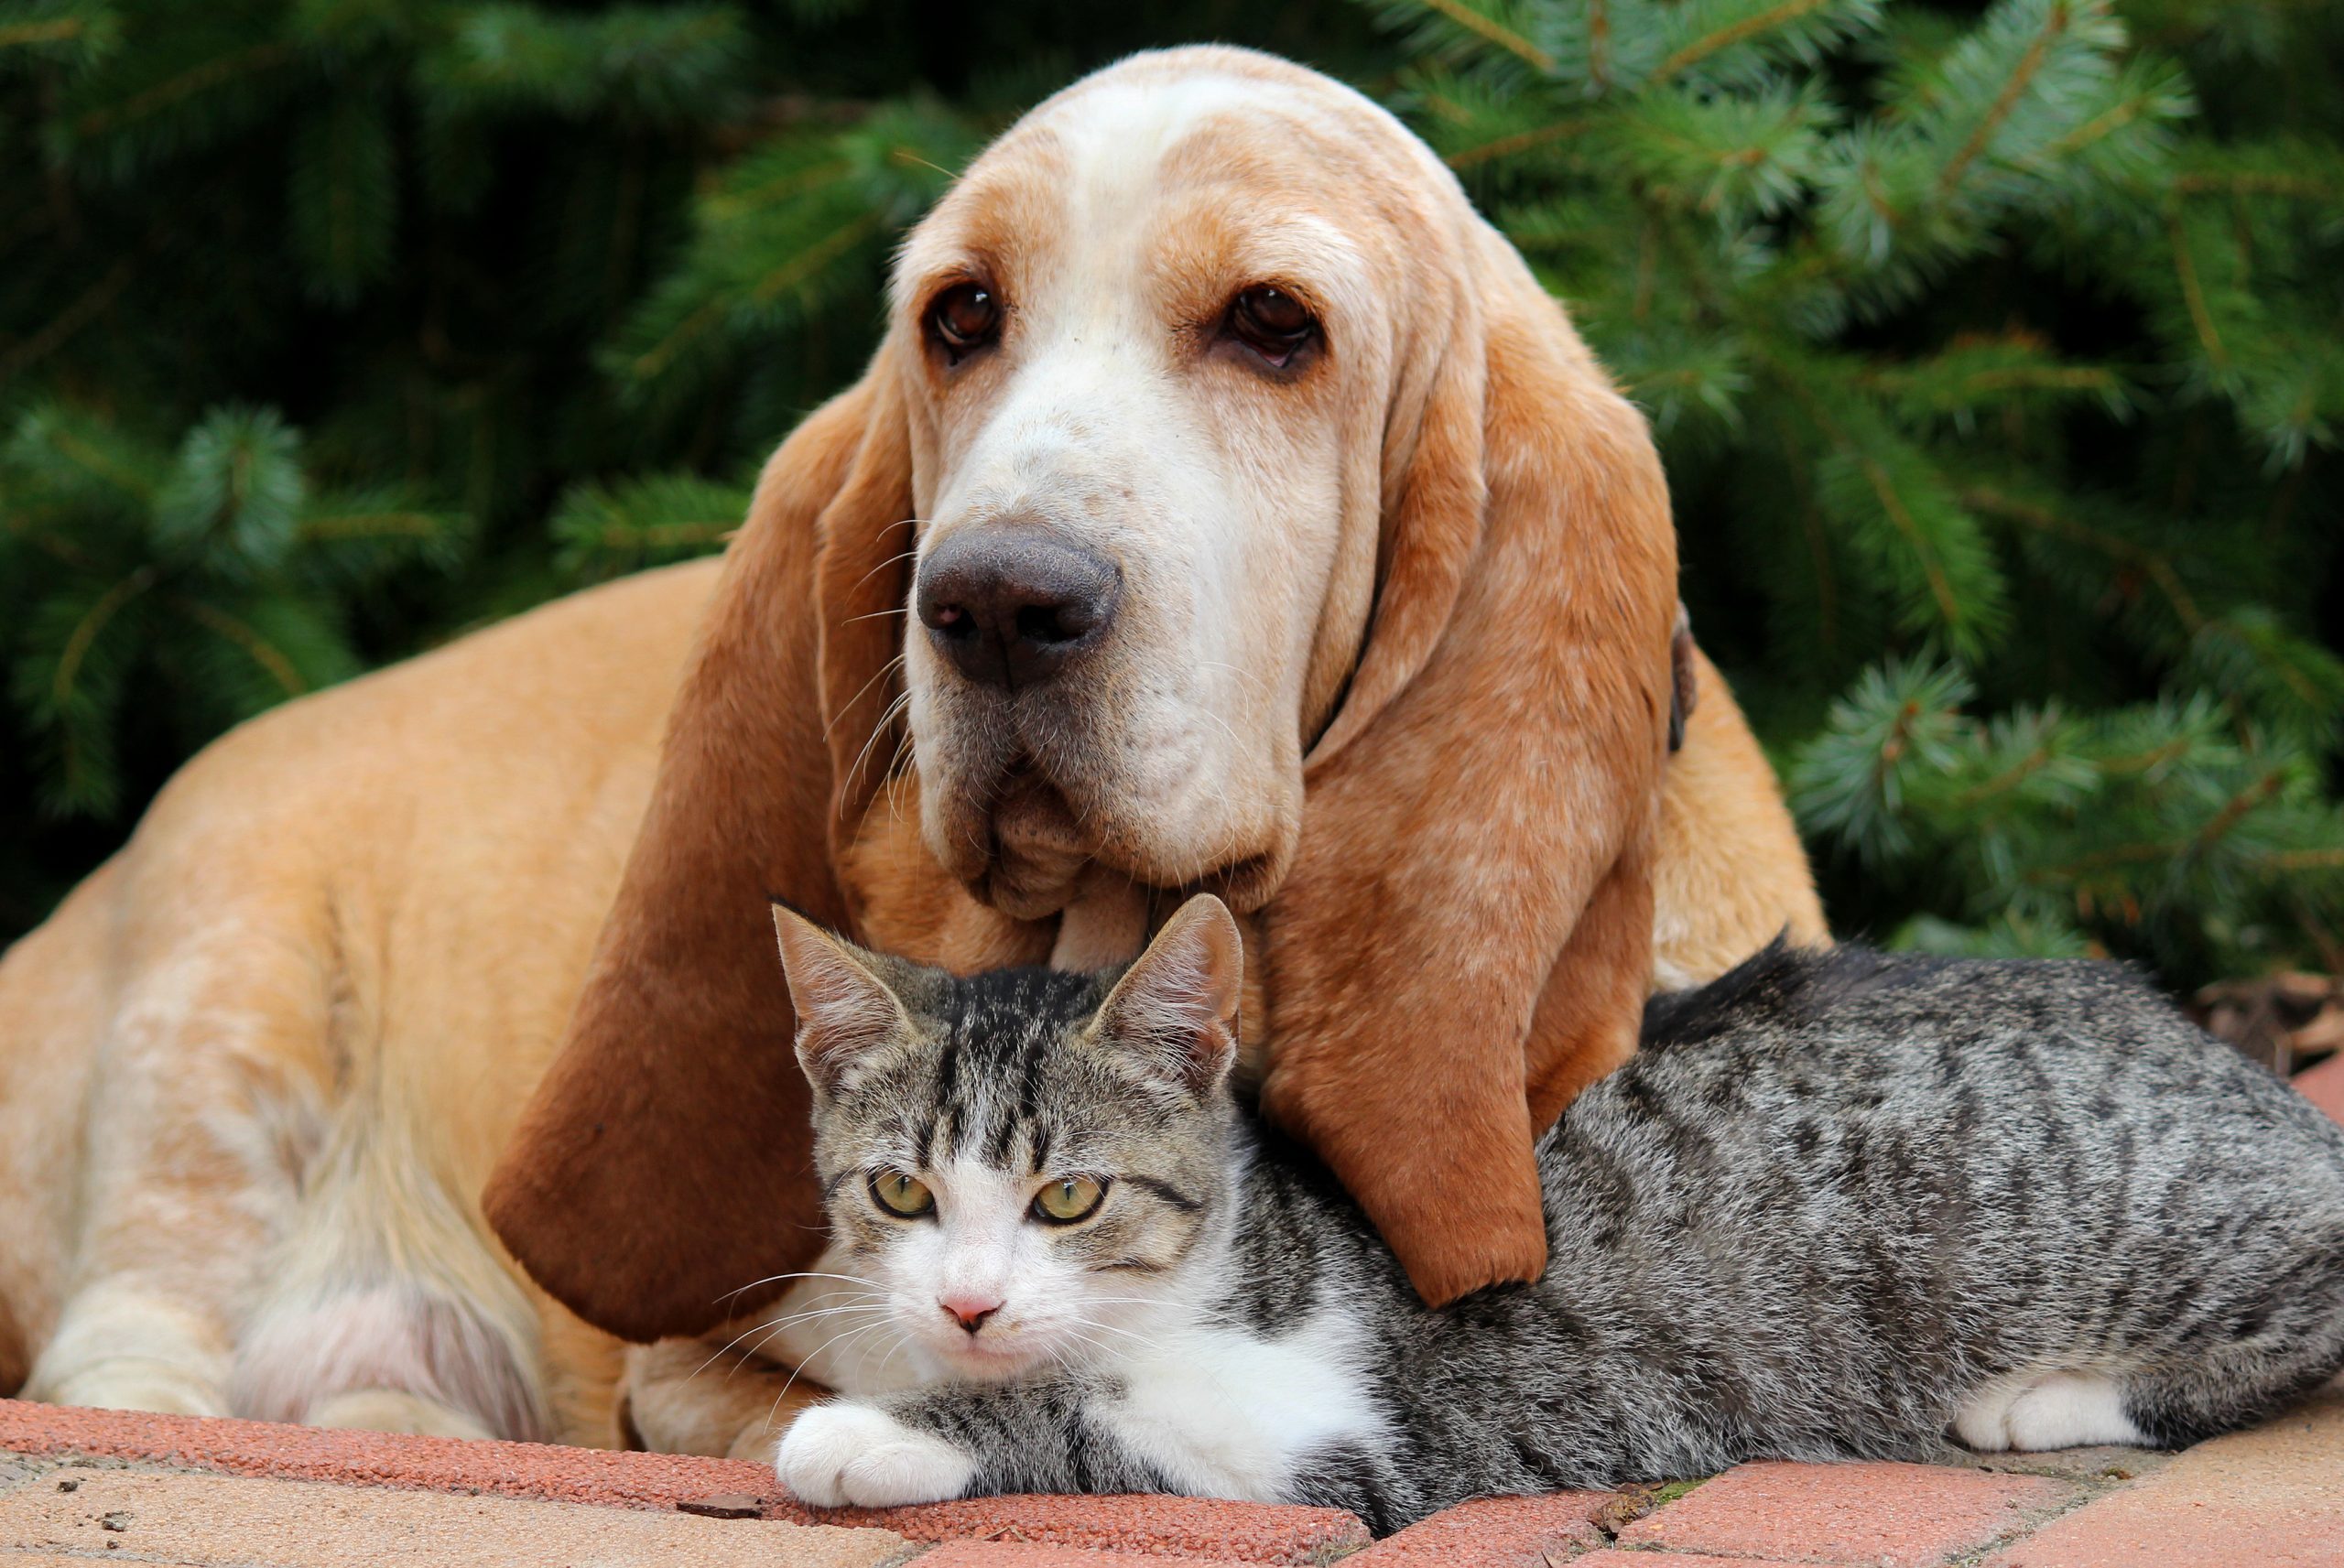 what breed of dog can live with cats